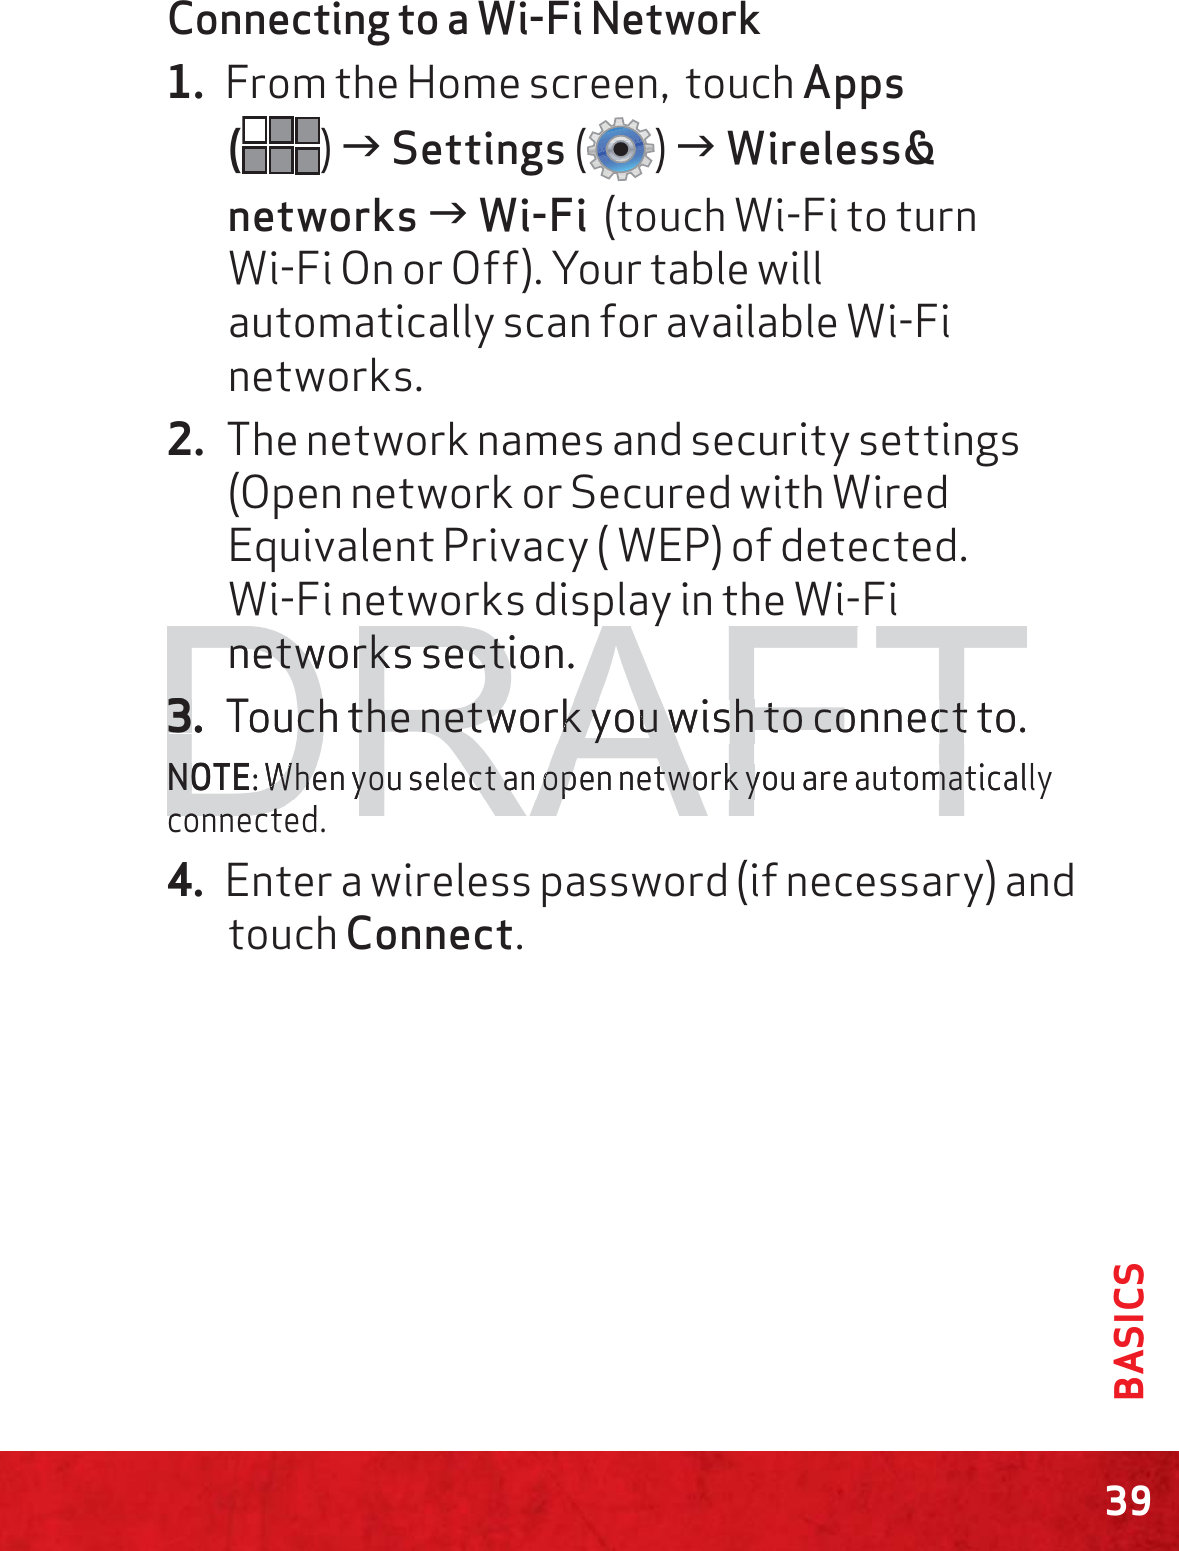 39BASICSConnecting to a Wi-Fi Network1. From the Home screen,  touch Apps  () J Settings () J Wireless&amp; networks J Wi-Fi  (touch Wi-Fi to turn  Wi-Fi On or Off). Your table will automatically scan for available Wi-Fi networks. 2. The network names and security settings (Open network or Secured with Wired Equivalent Privacy ( WEP) of detected.  Wi-Fi networks display in the Wi-Fi networks section.3. Touch the network you wish to connect to.NOTE: When you select an open network you are automatically connected.4. Enter a wireless password (if necessary) and touch Connect.DRAFTpypynetnetworks section.works secti3.3Touch the network you wish to connect to.ch the network you wish to connectNONOTE: When you select an open network you are automatical: When you select an open network you are automacoconnectednnecte